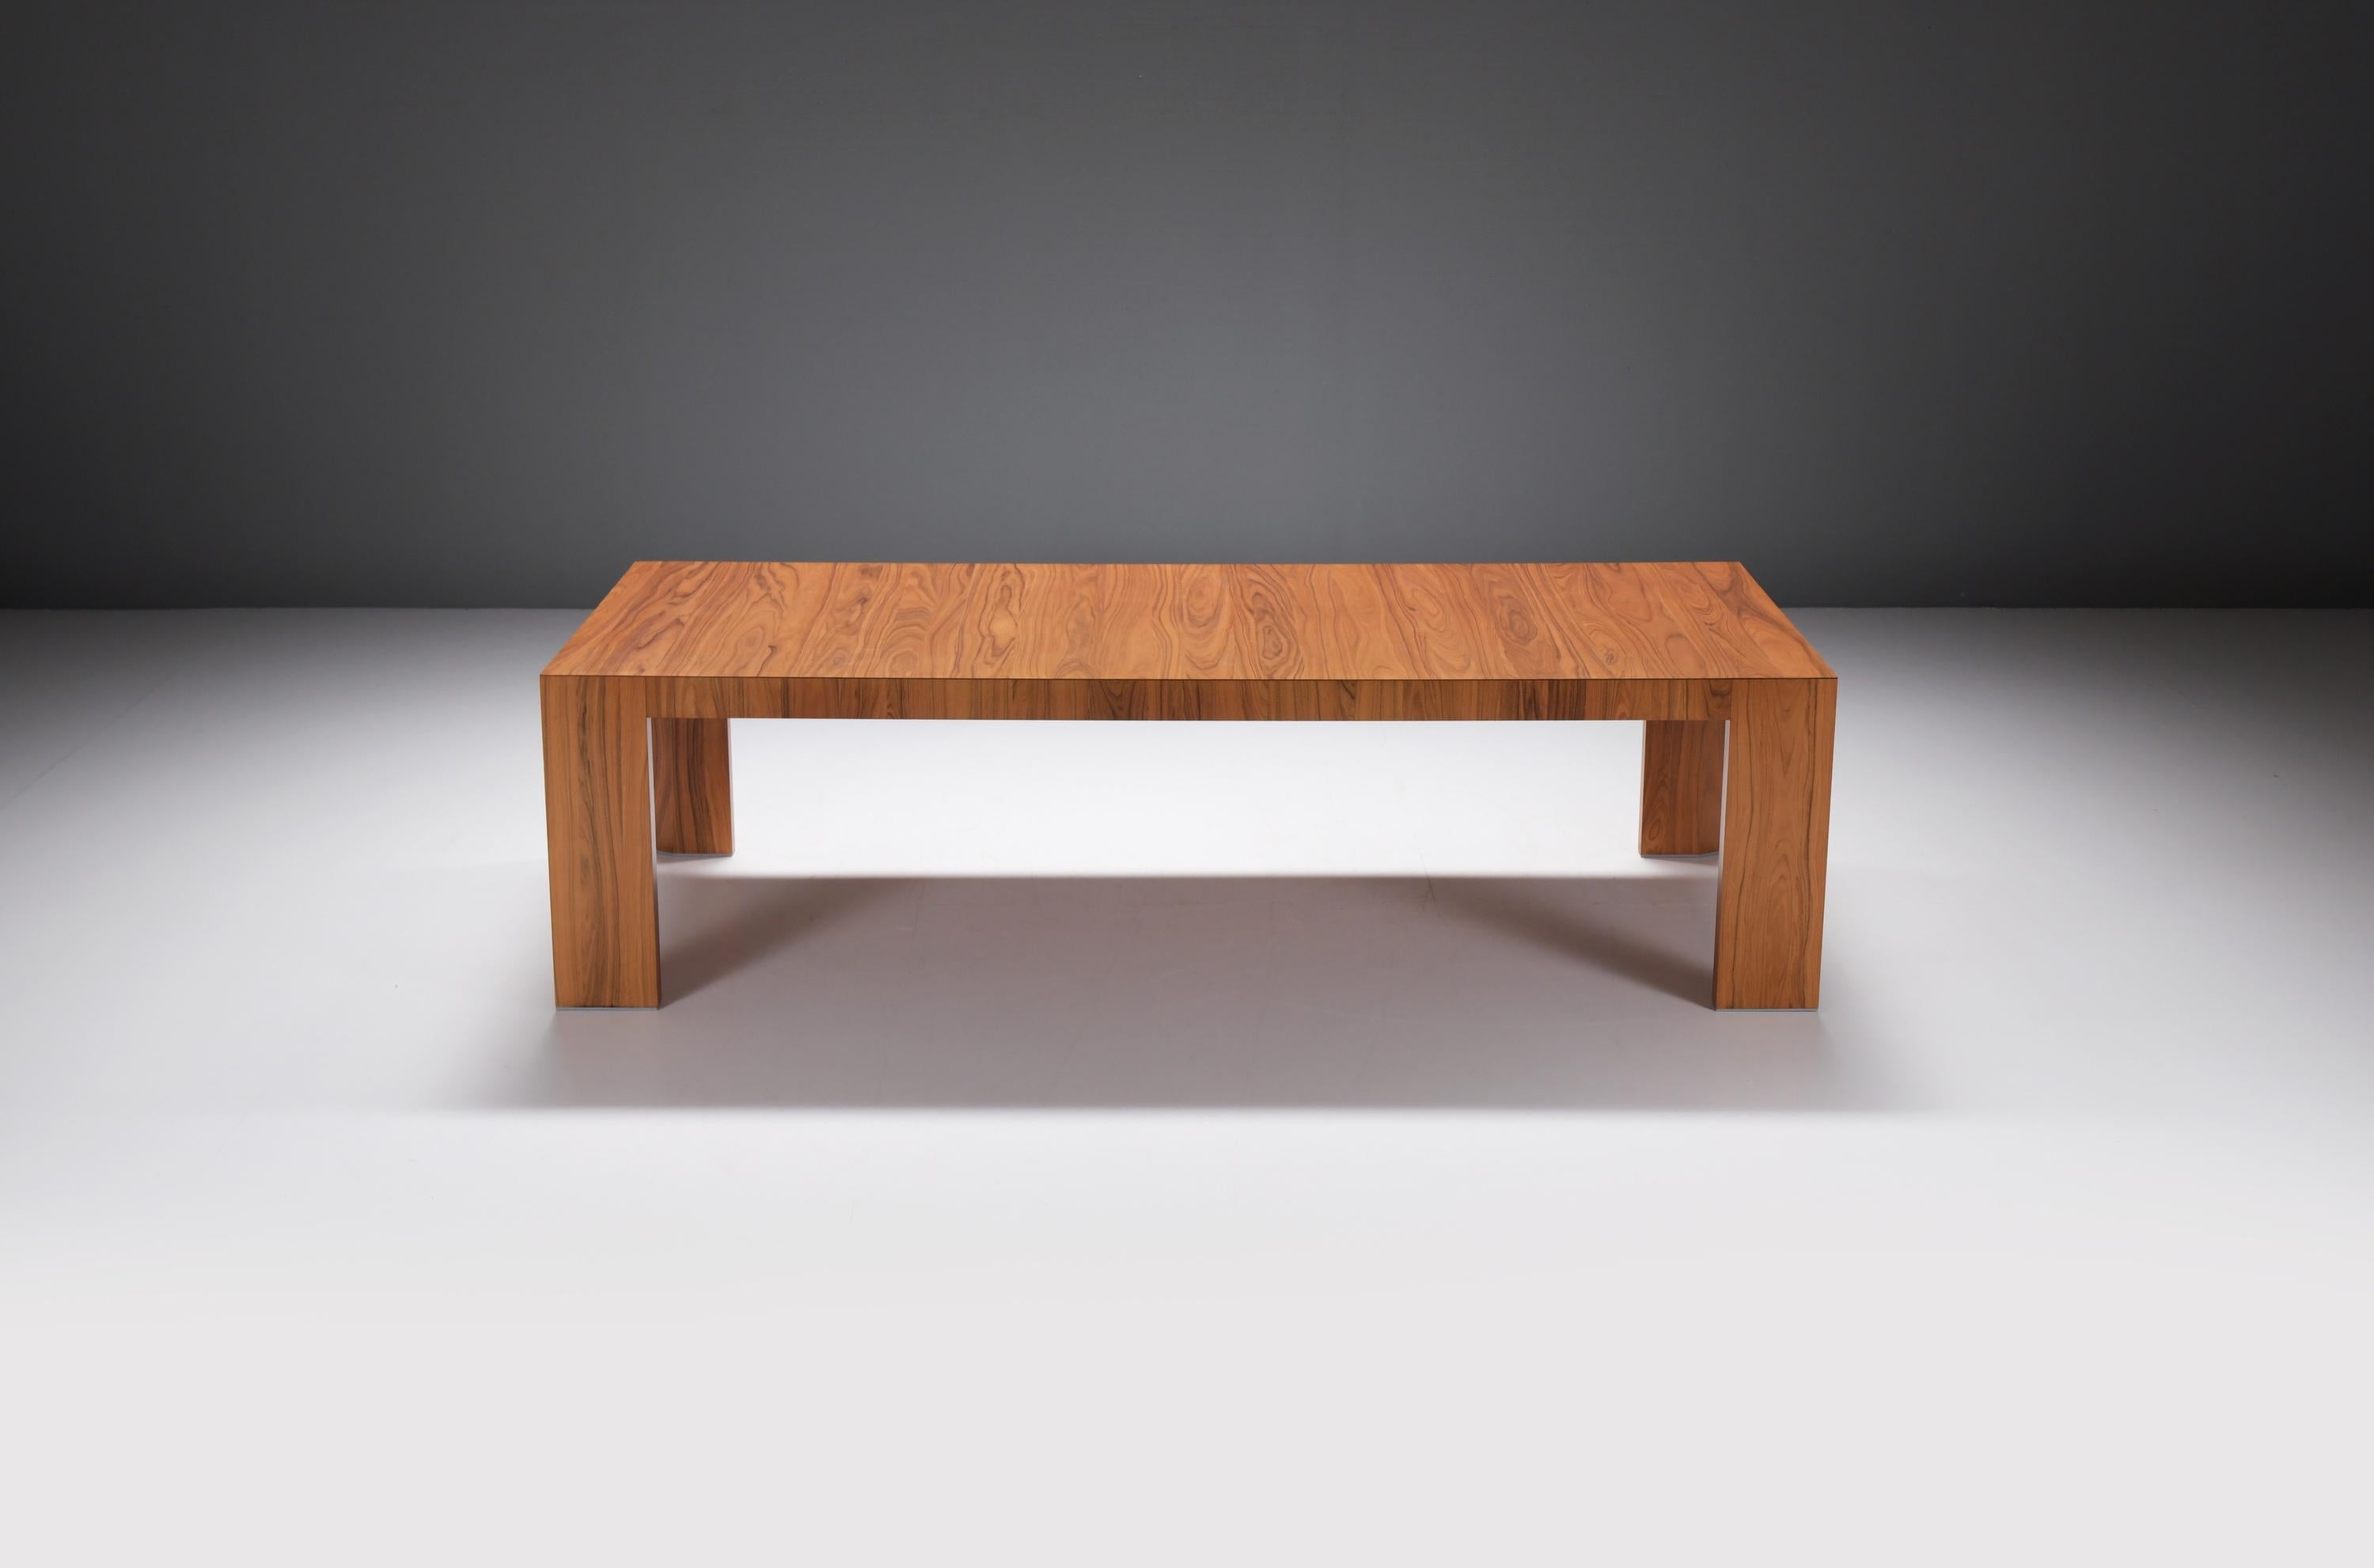 Stunning CASSINA dining  El Dom xl dining table (270cm) in Santos Rosewood.Designed by Hannes Wettstein for Cassina.Hannes Wettstein design. Clean, simple, powerful and extremely elegant lines for a rectangular table in solid wood intended to bring